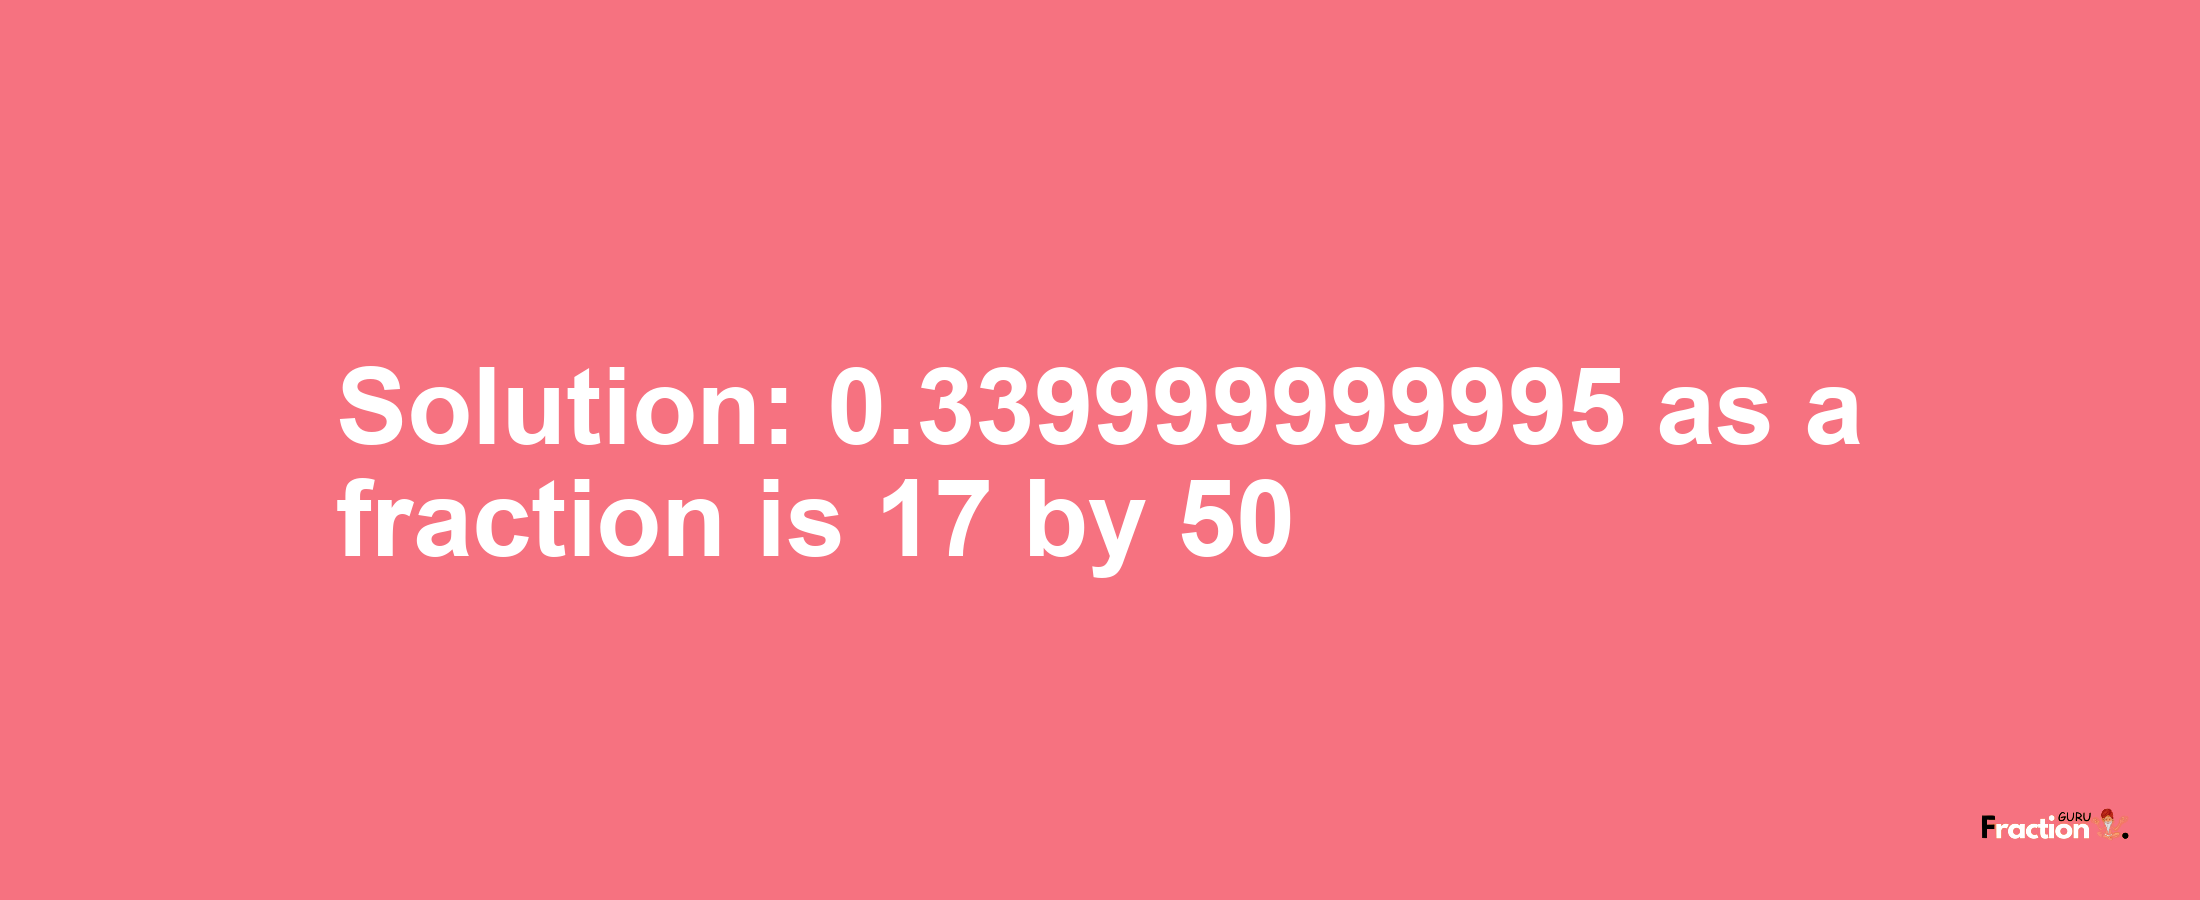 Solution:0.339999999995 as a fraction is 17/50